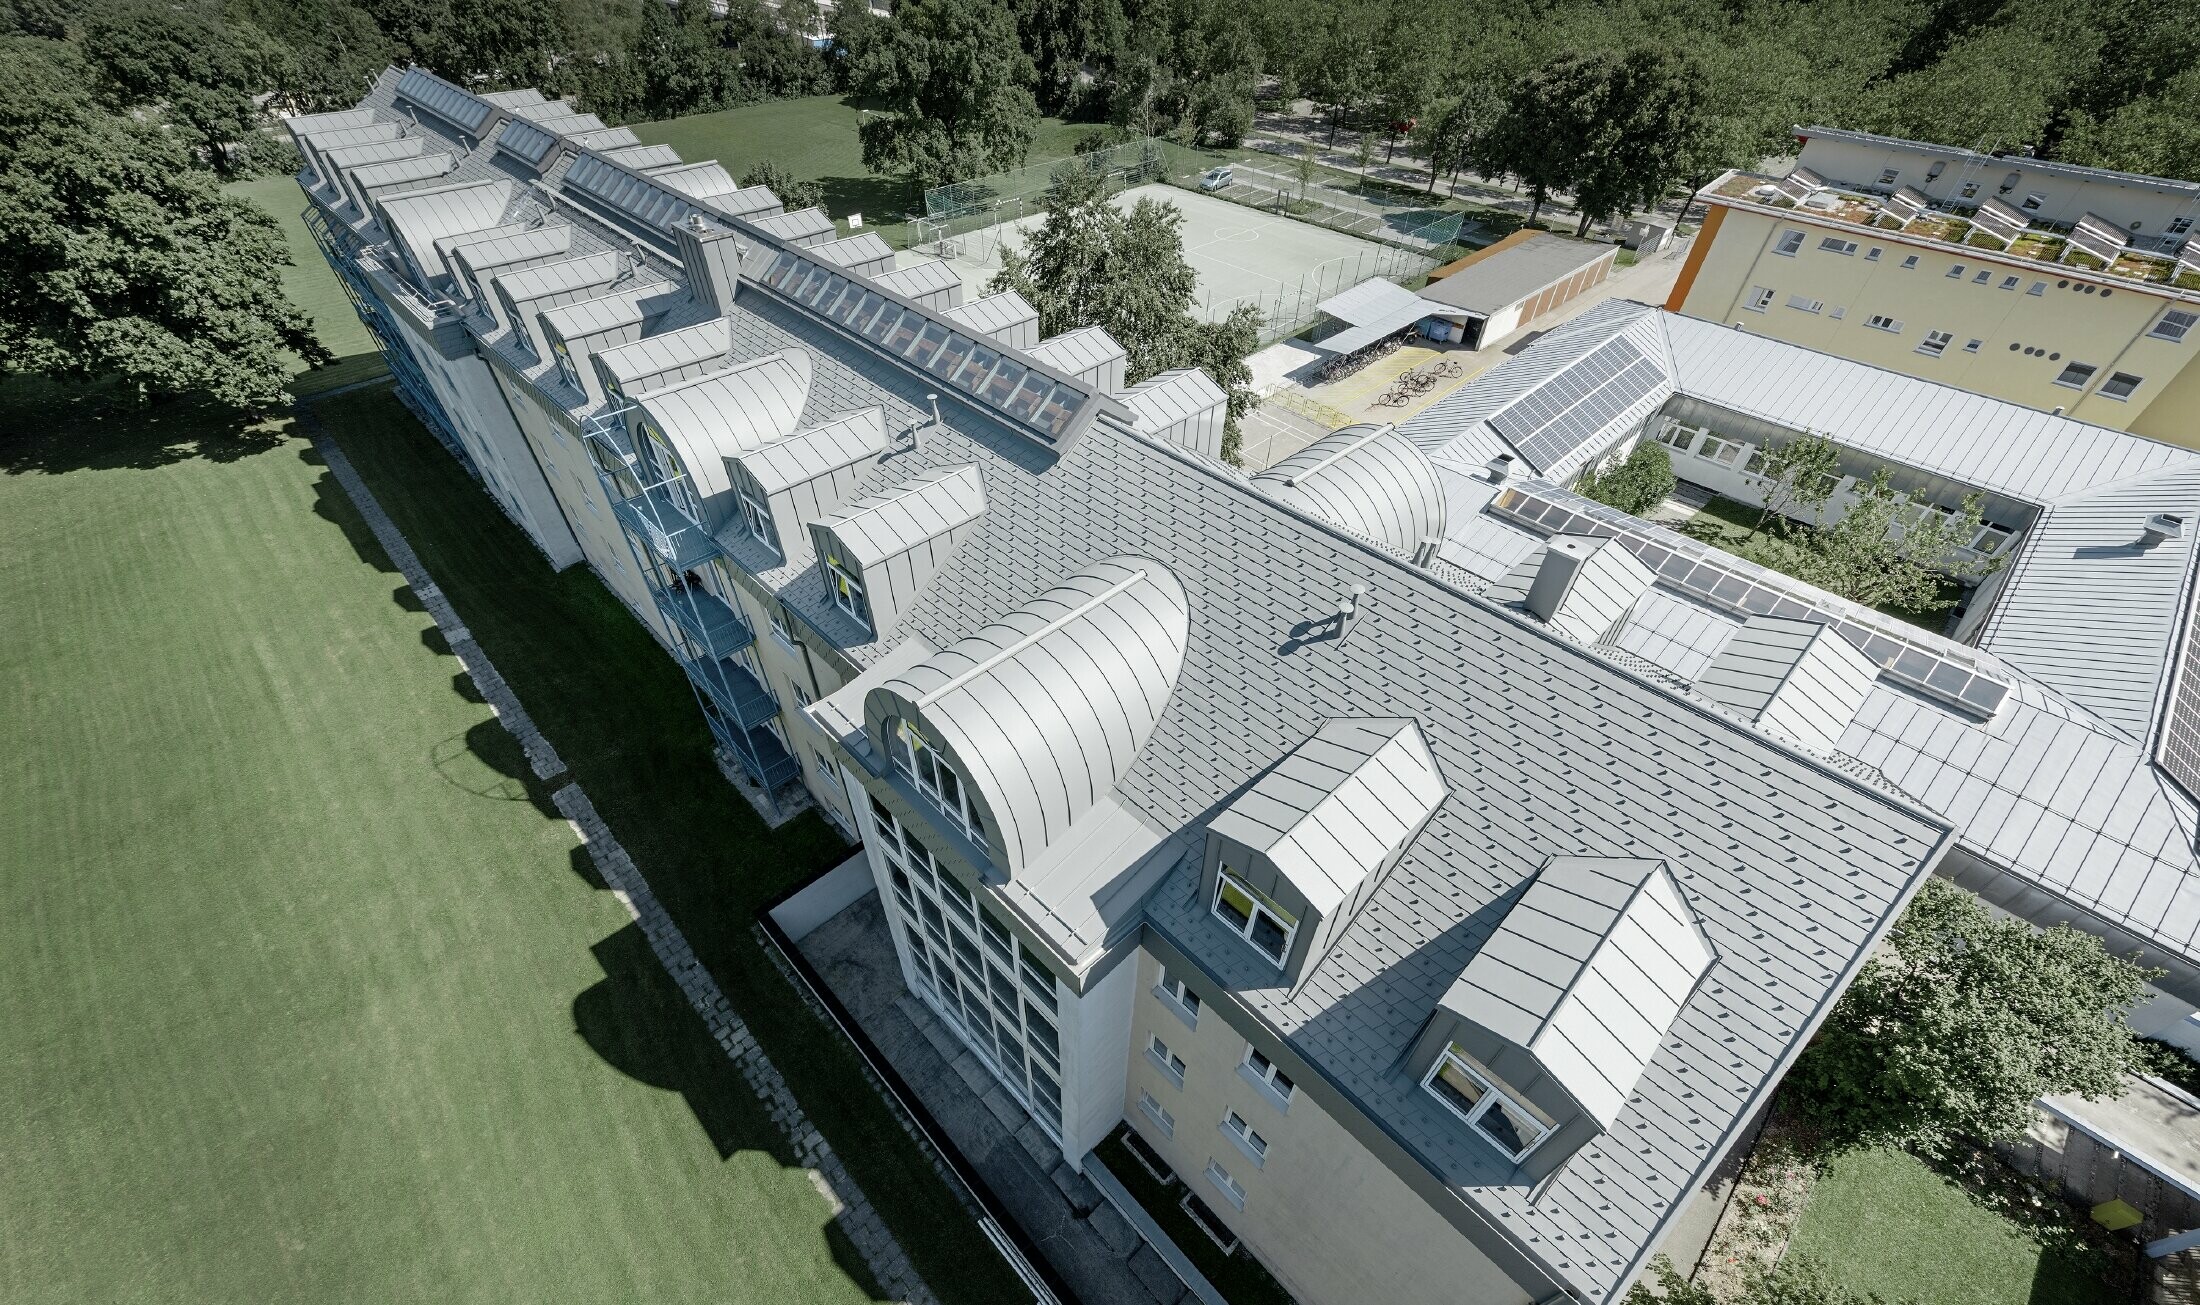 Top floor of the Albertinum building in Munich (Germany) with PREFA shingle and standing seam in light grey